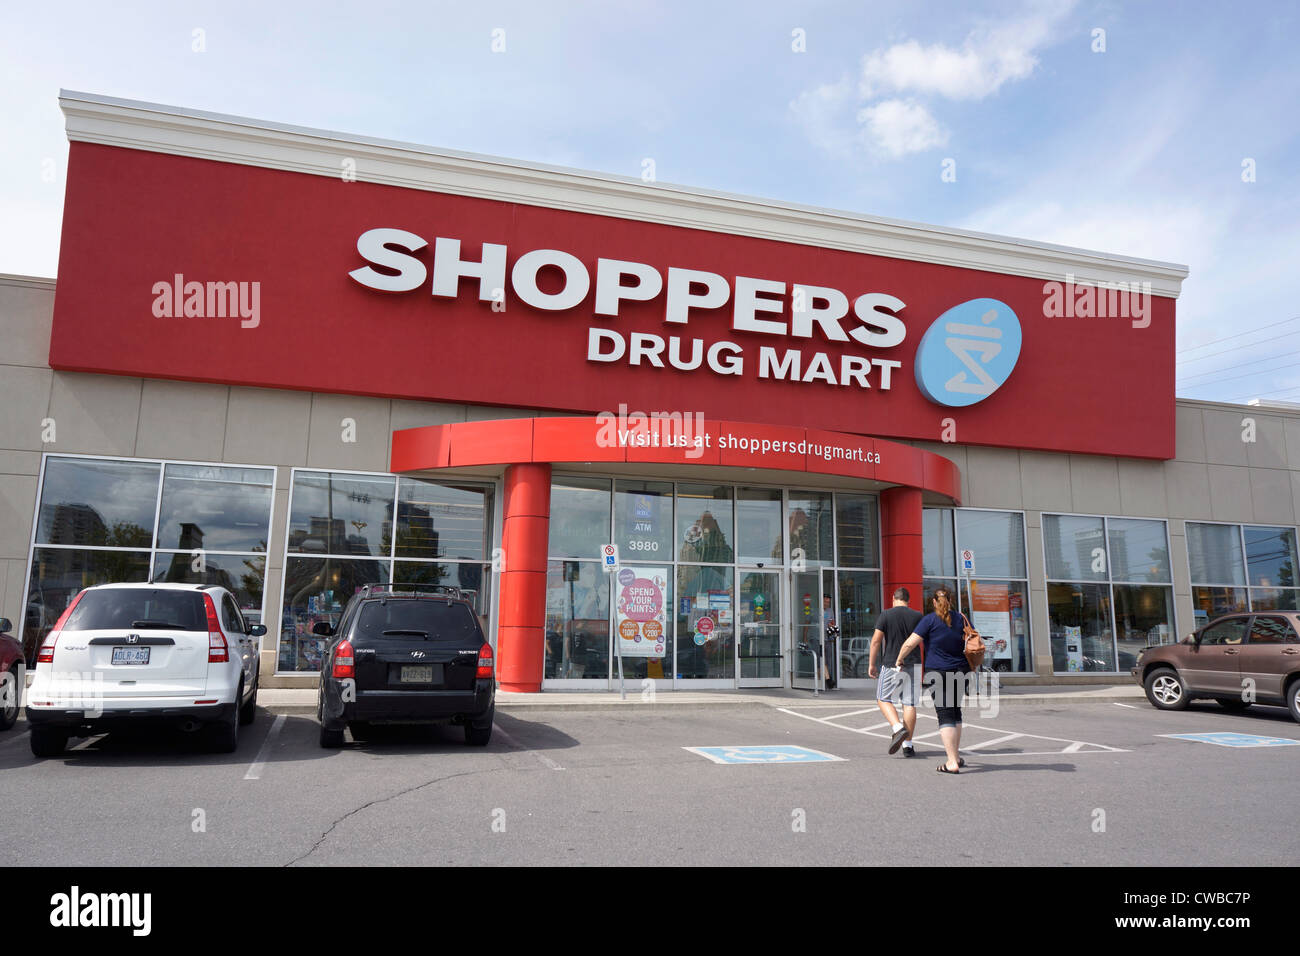 Shoppers Drug Mart, Ontario, Canada Banque D'Images